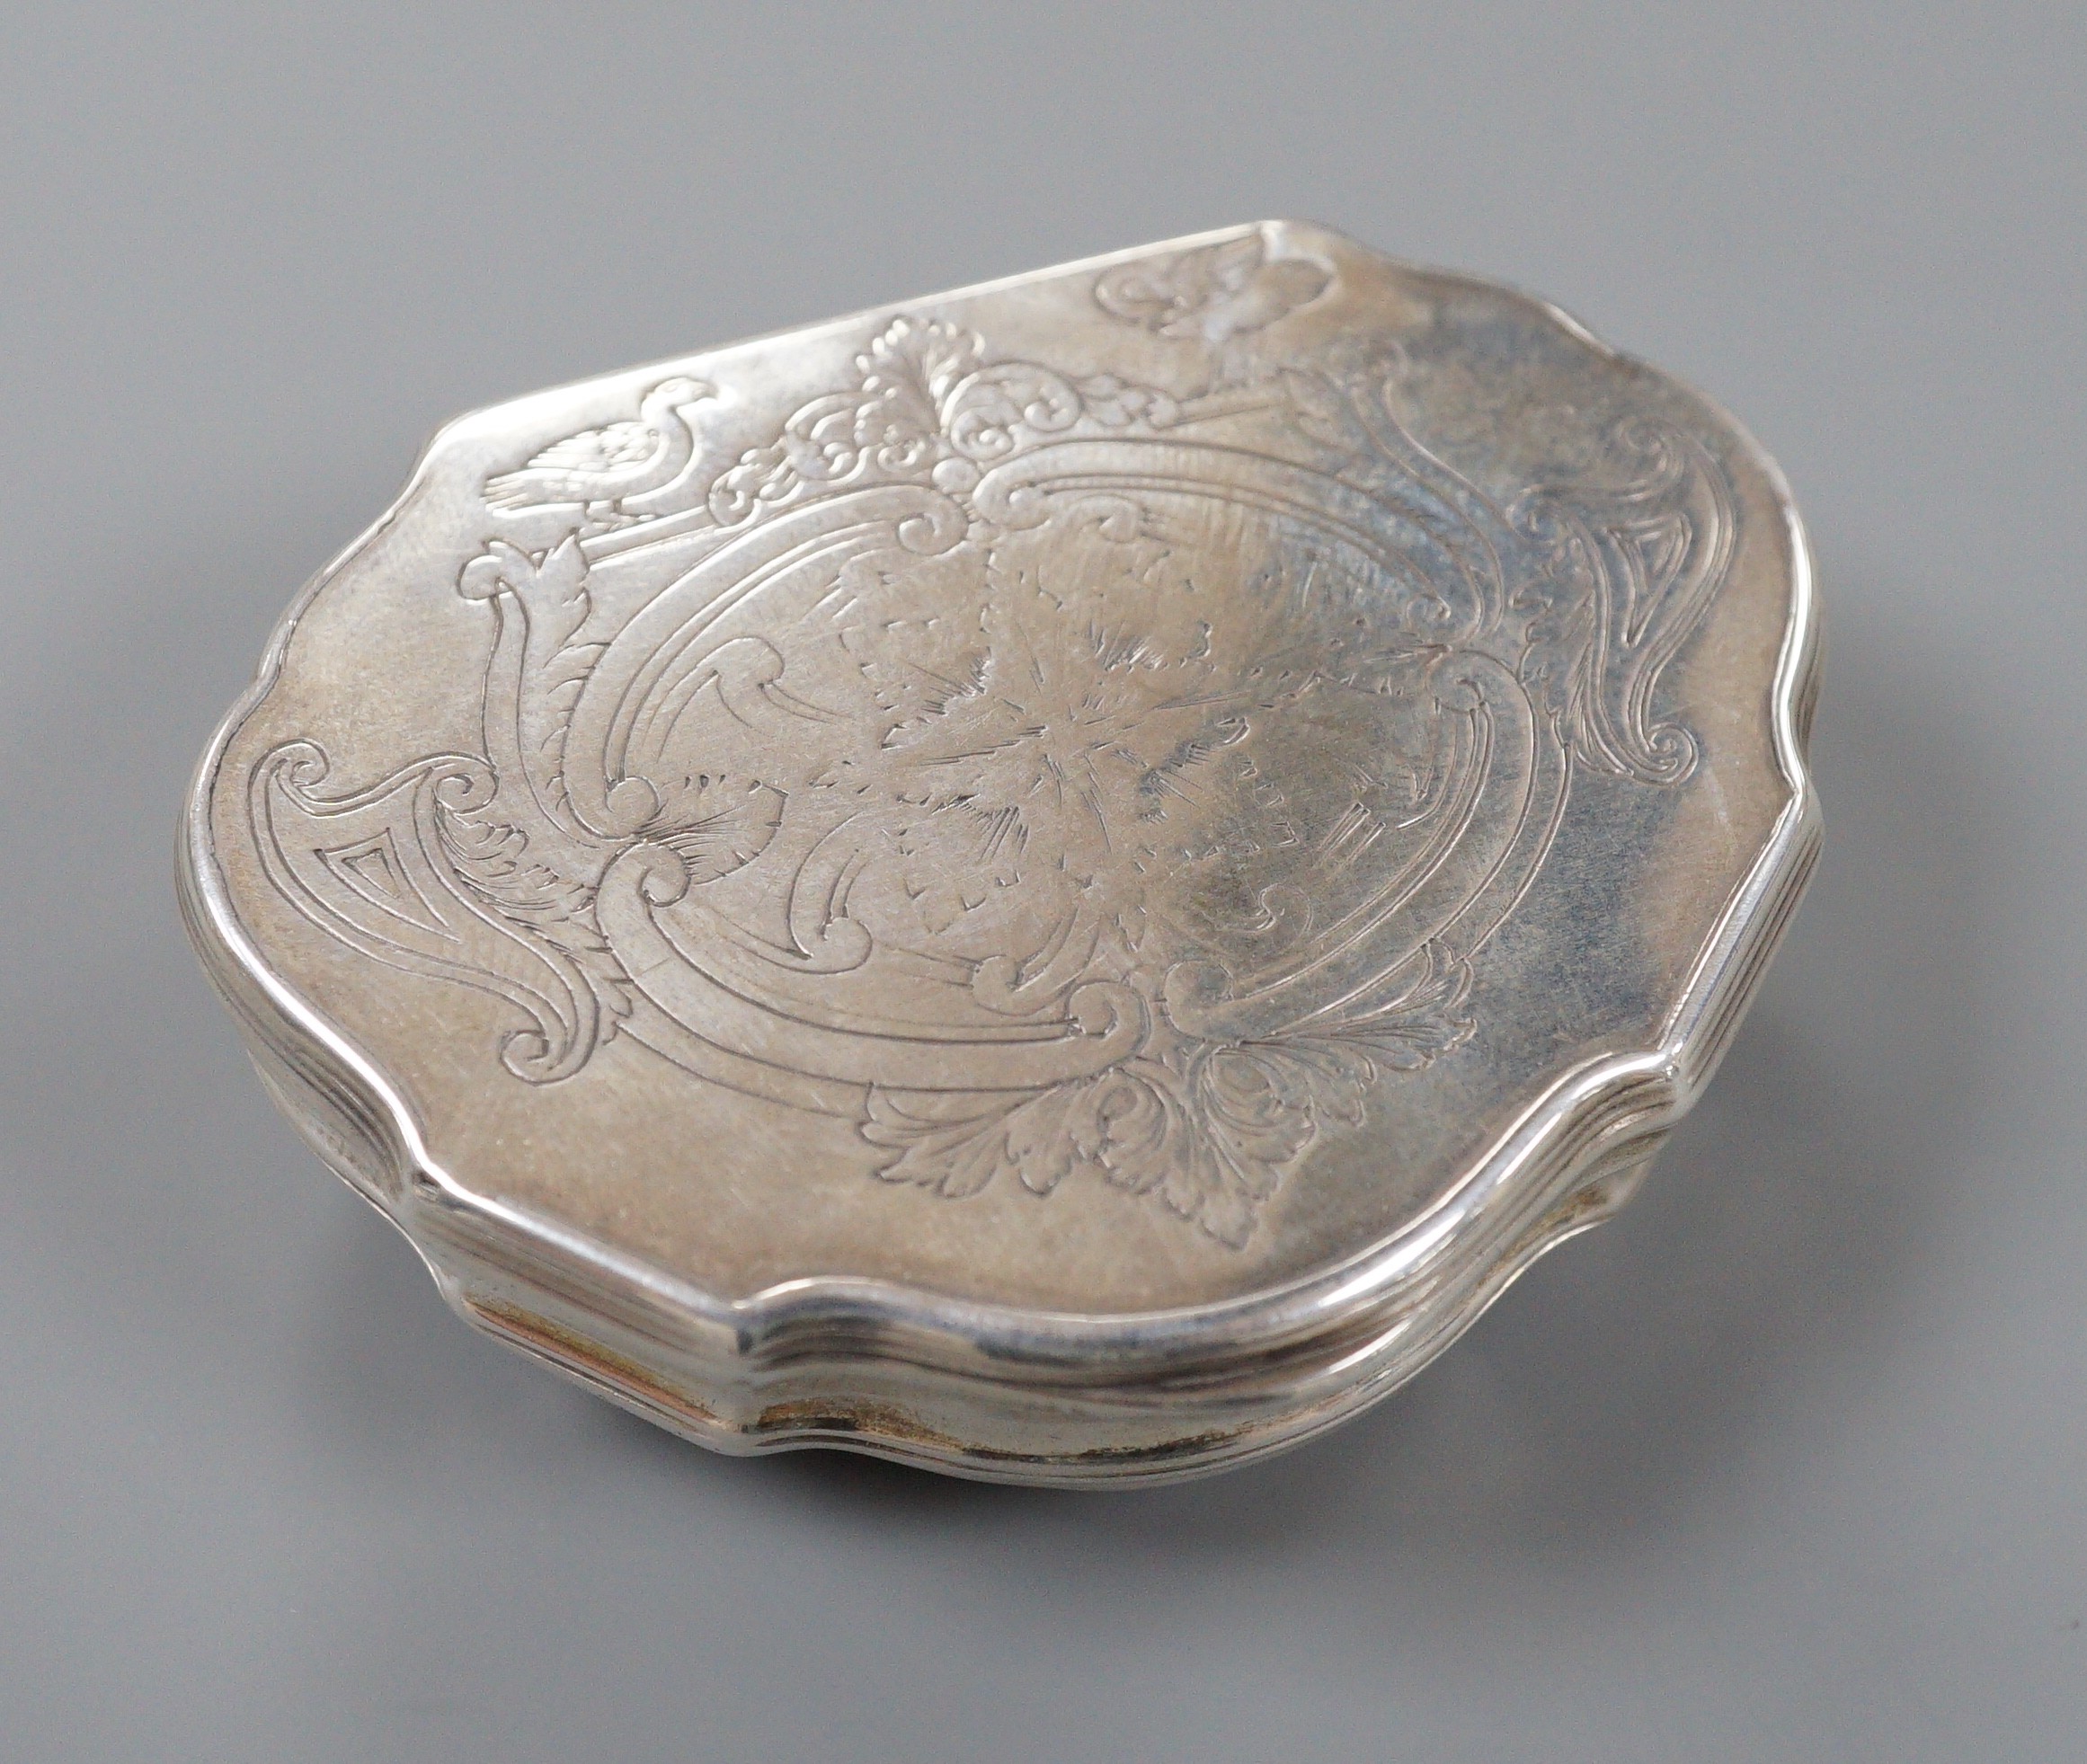 A late 18th/early 19th century white metal shaped demi-lune snuff box, makers mark, OR, 7cm, 69.5 grams.